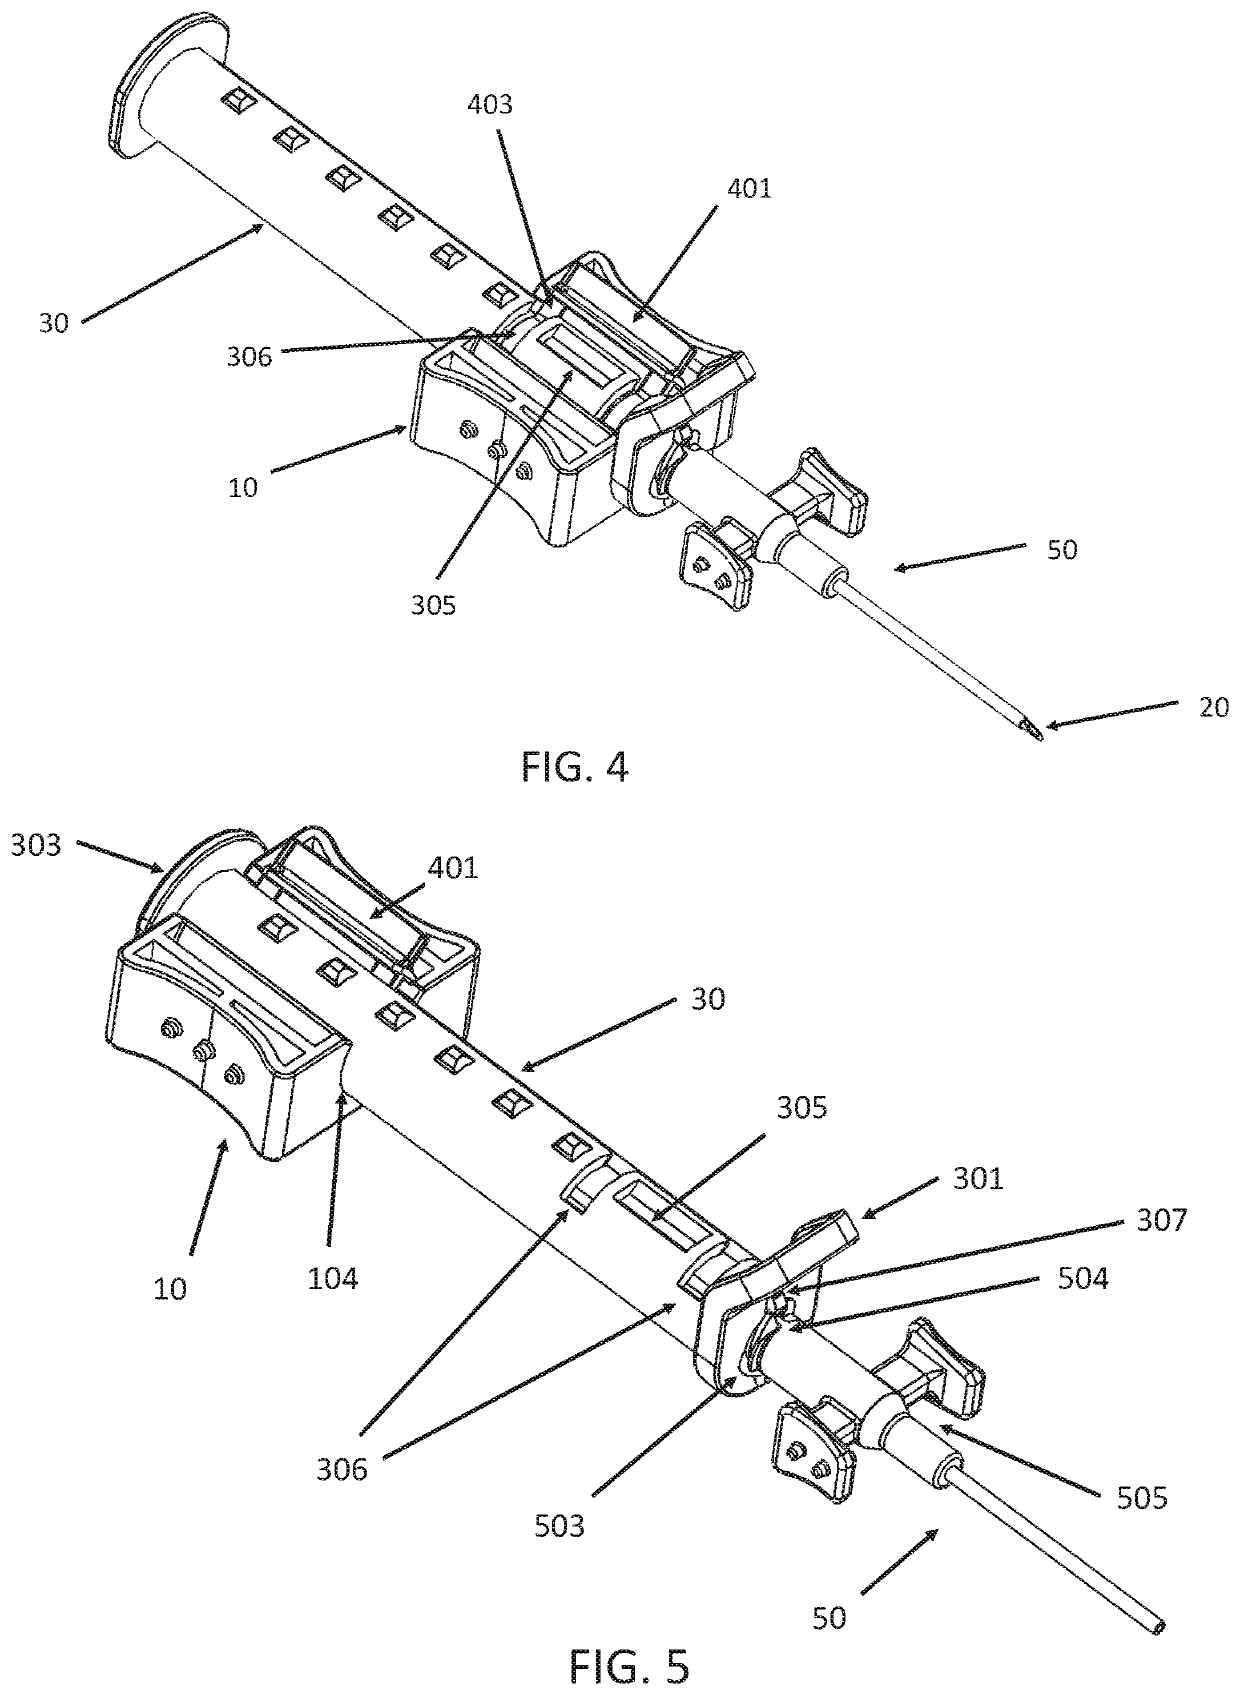 Intravenous access assist device with safety feature